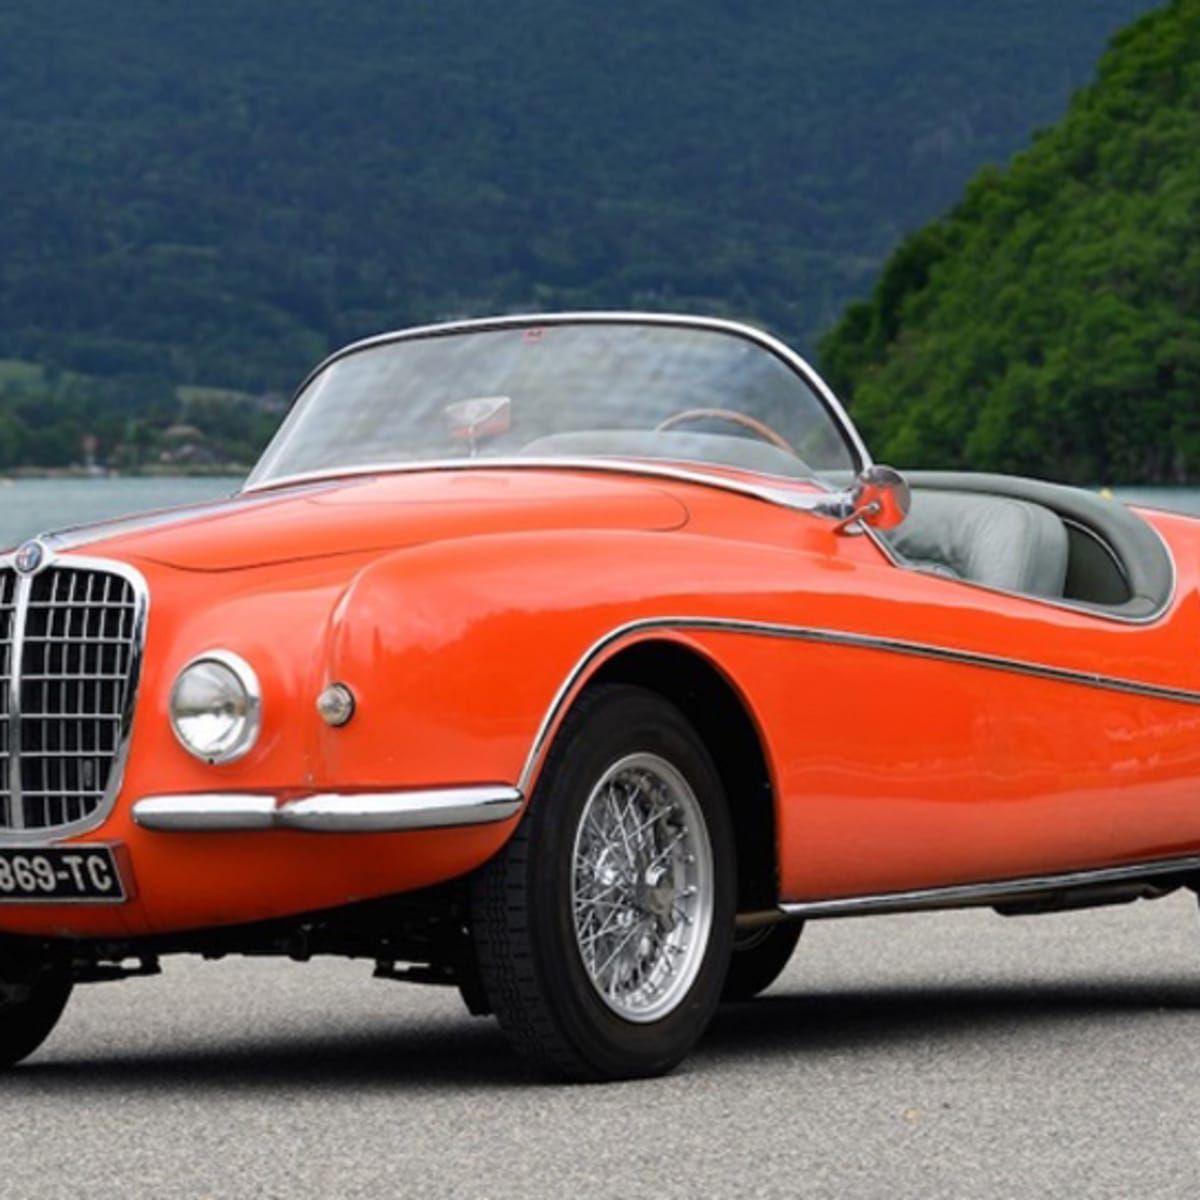 Bonhams takes to the Swiss Alps on July 3rd - Old Cars Weekly